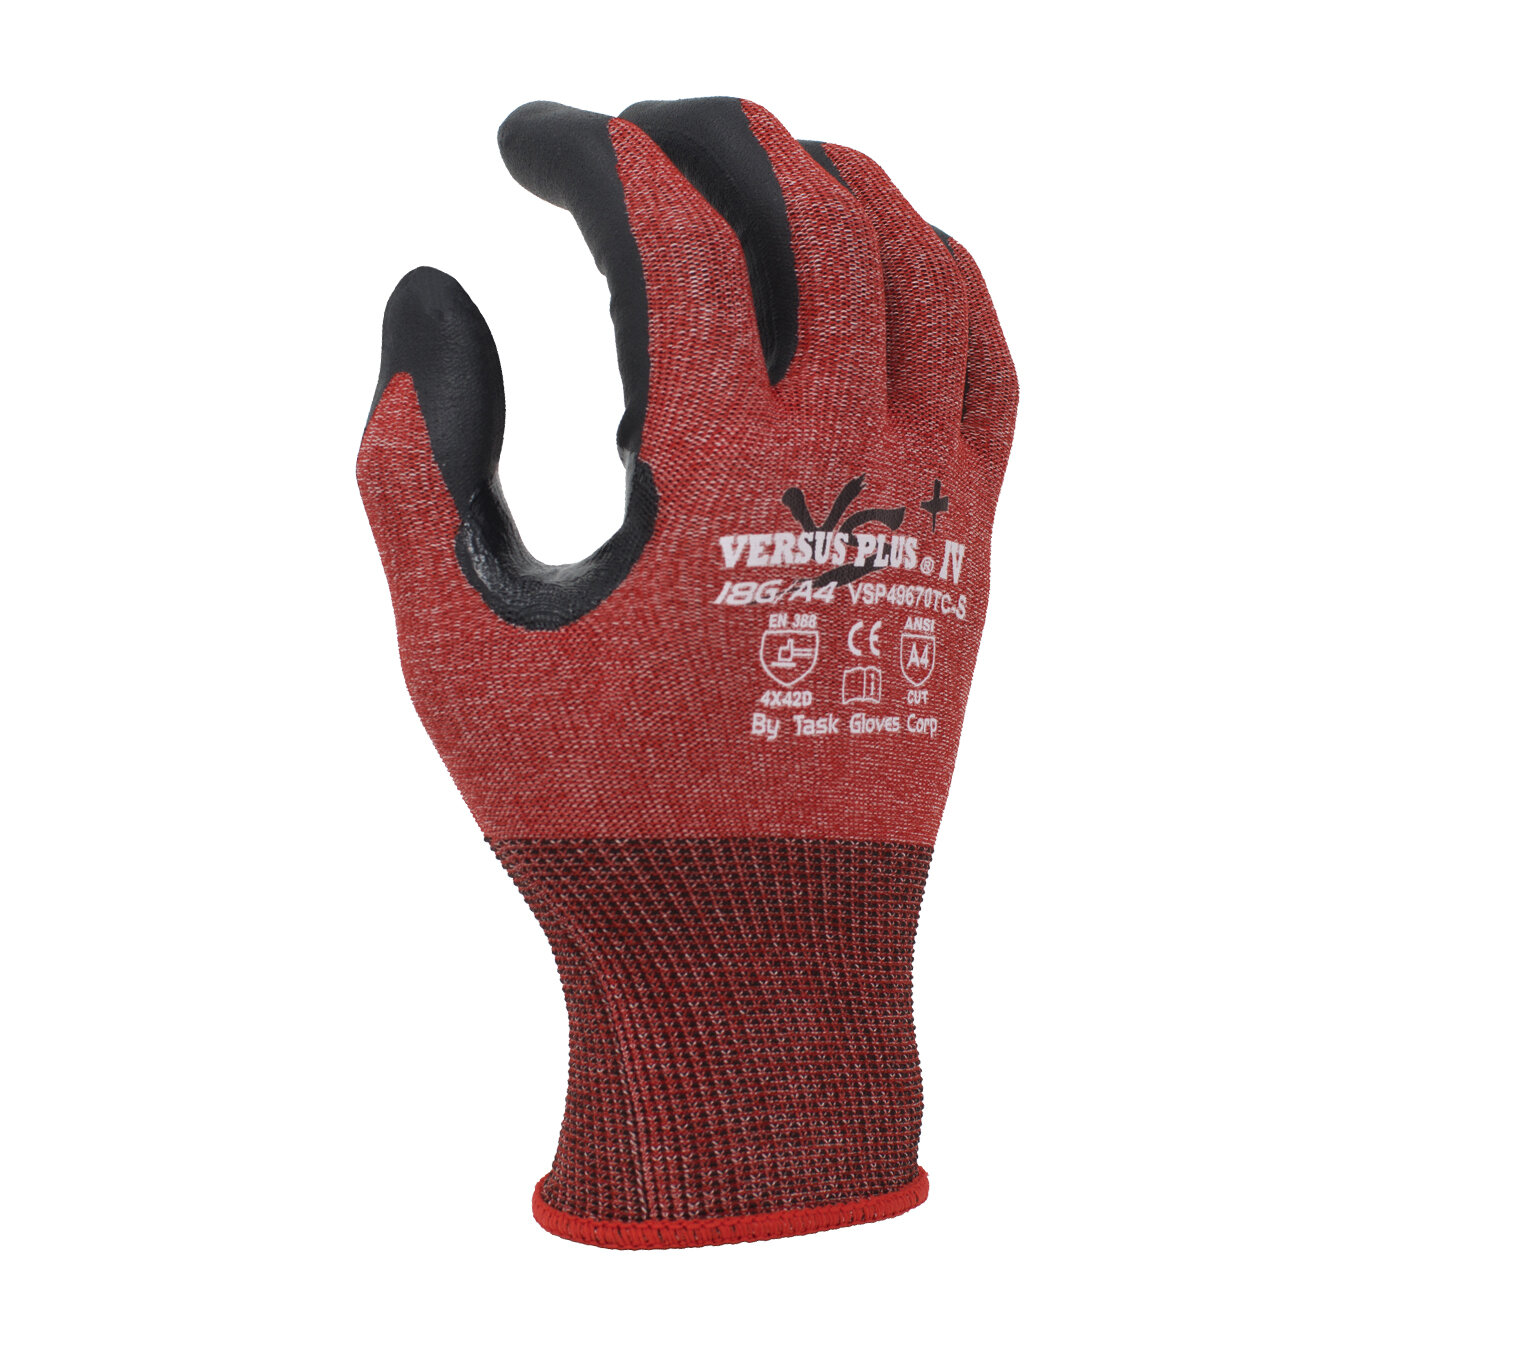 SHOWA 8210 D/Flex G4 Engineered Composite Yarn Fiber Glove Pack of 12 Pairs 10 Gauge Seamless Knit Color-Coded Cuff X-Large Cut Resistant Smooth Grip